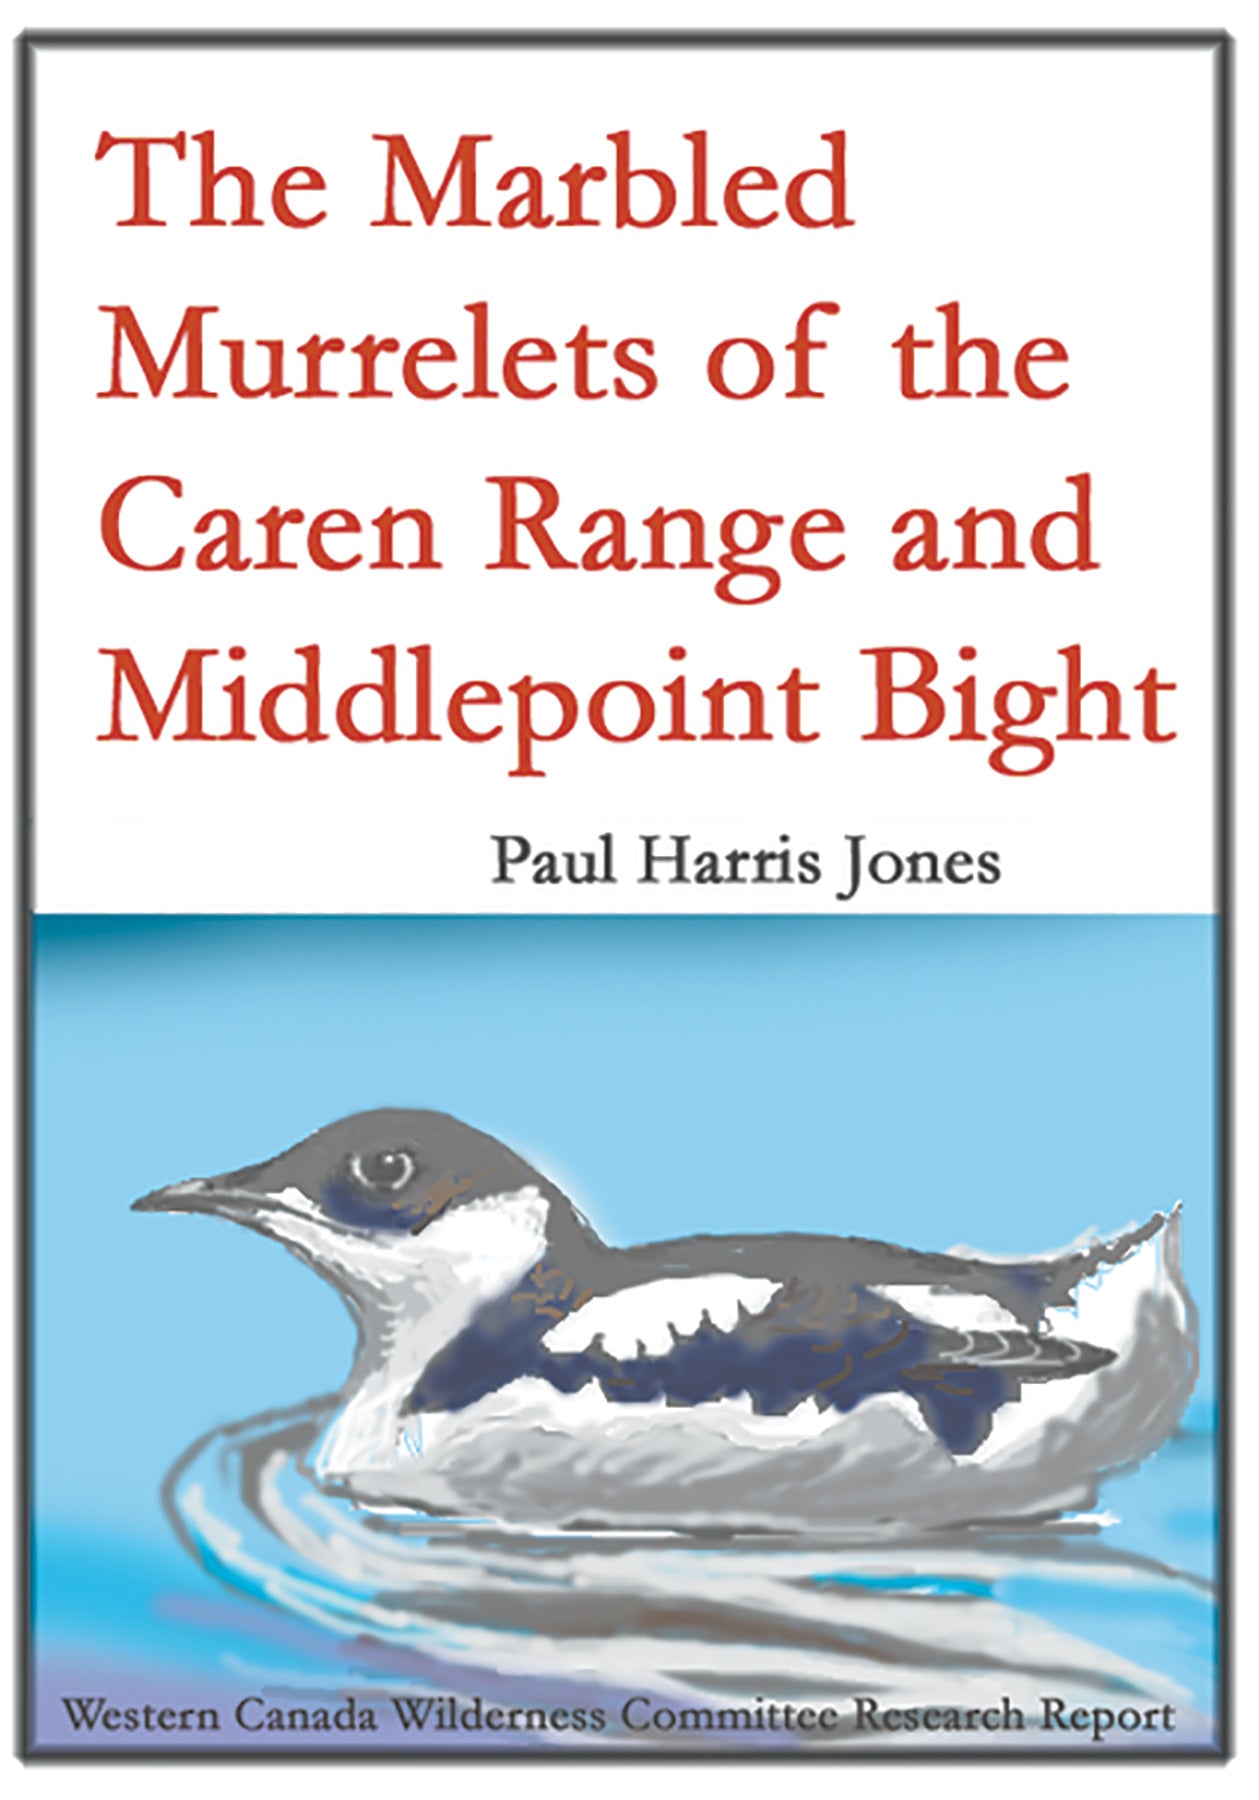 A painting of a marbled murrelet swimming. Text over the image says "The Marbled Murrelets of the Caren Range and Middlepoint Bight. Paul Harris Jones. Western Canada Wilderness Committee Research Report." End of image description.